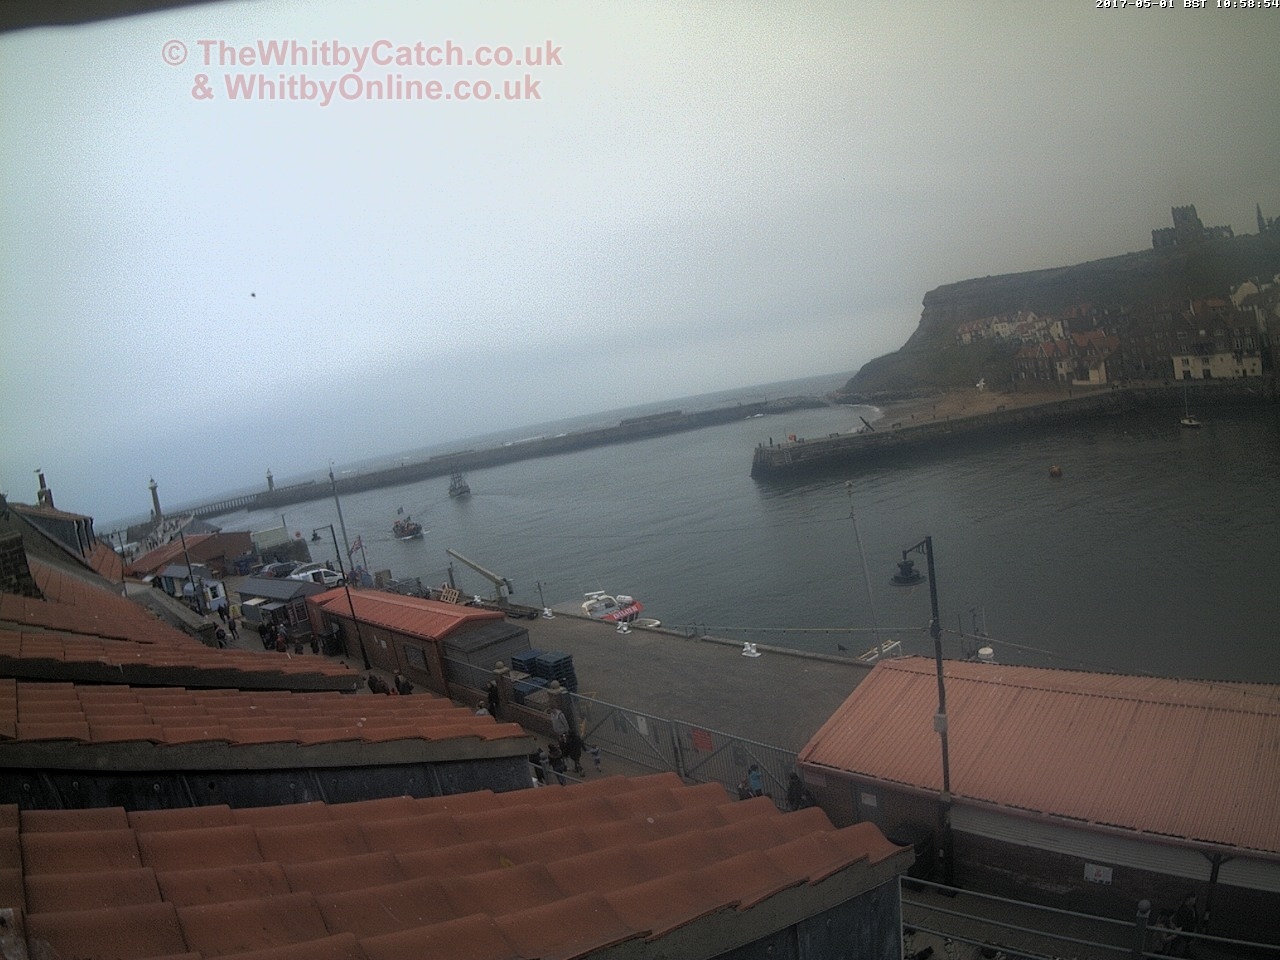 Whitby Mon 1st May 2017 10:59.